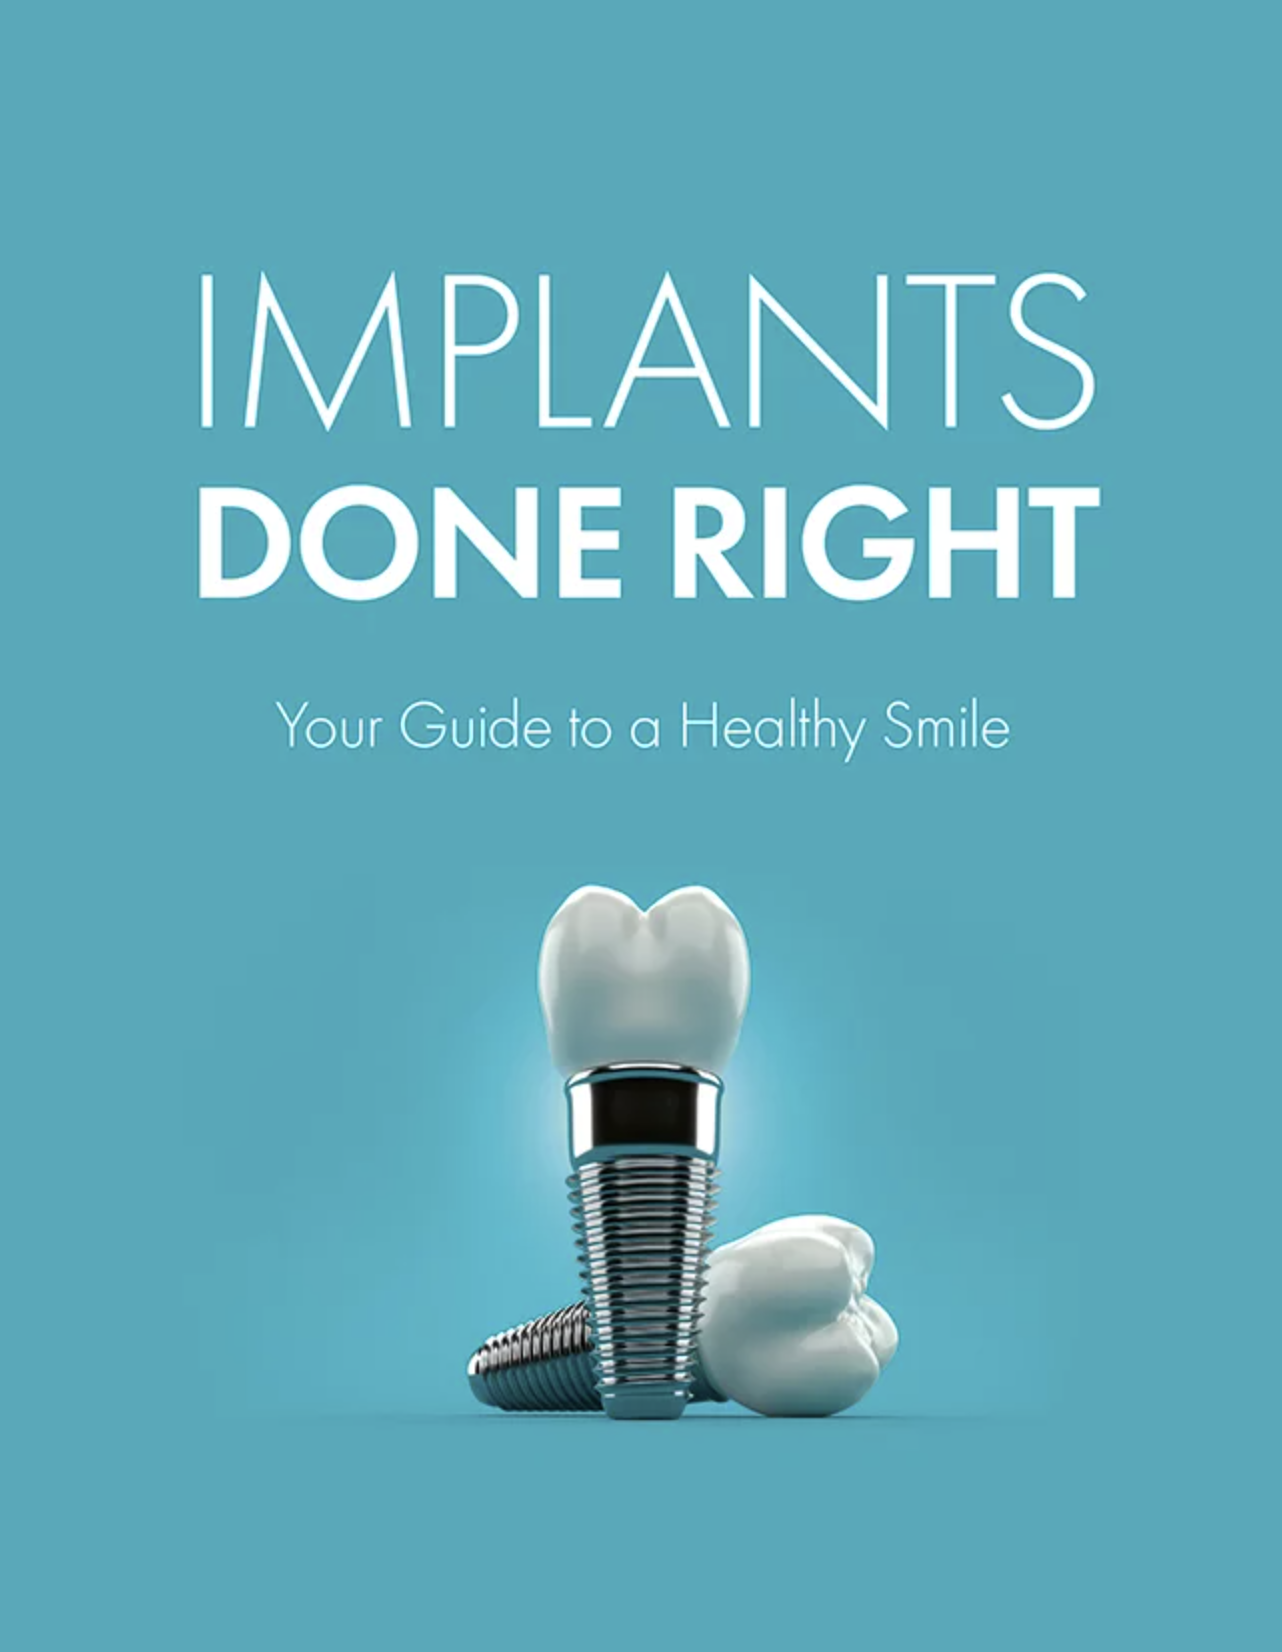 Implants Done Right Your Guide to a Healthy Smile